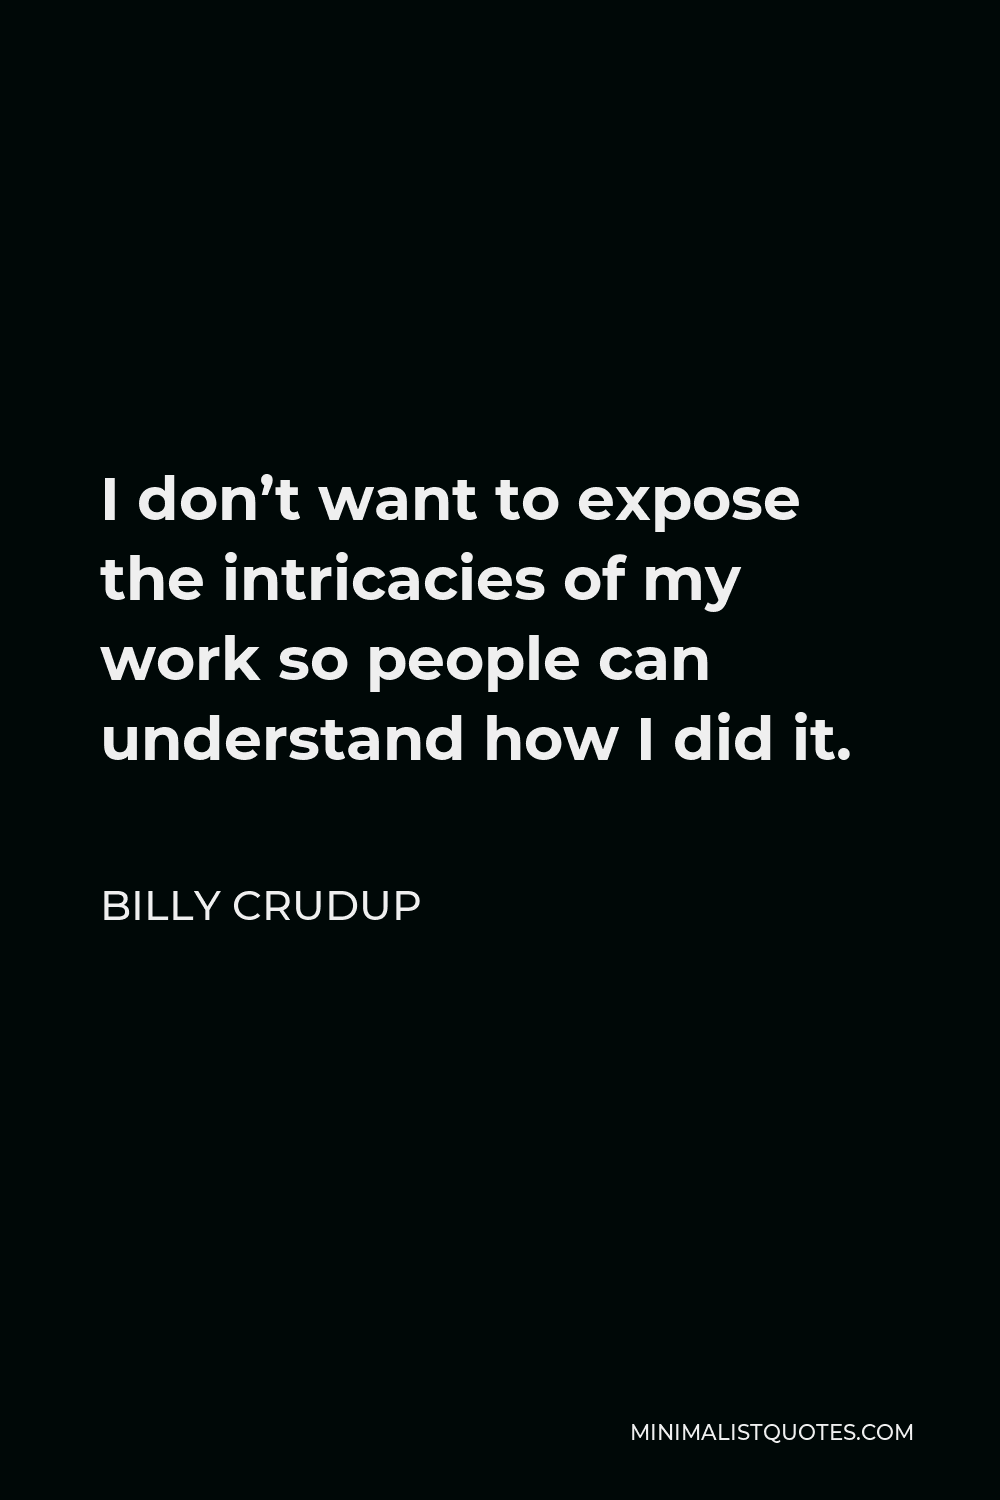 Billy Crudup Quote - I don’t want to expose the intricacies of my work so people can understand how I did it.